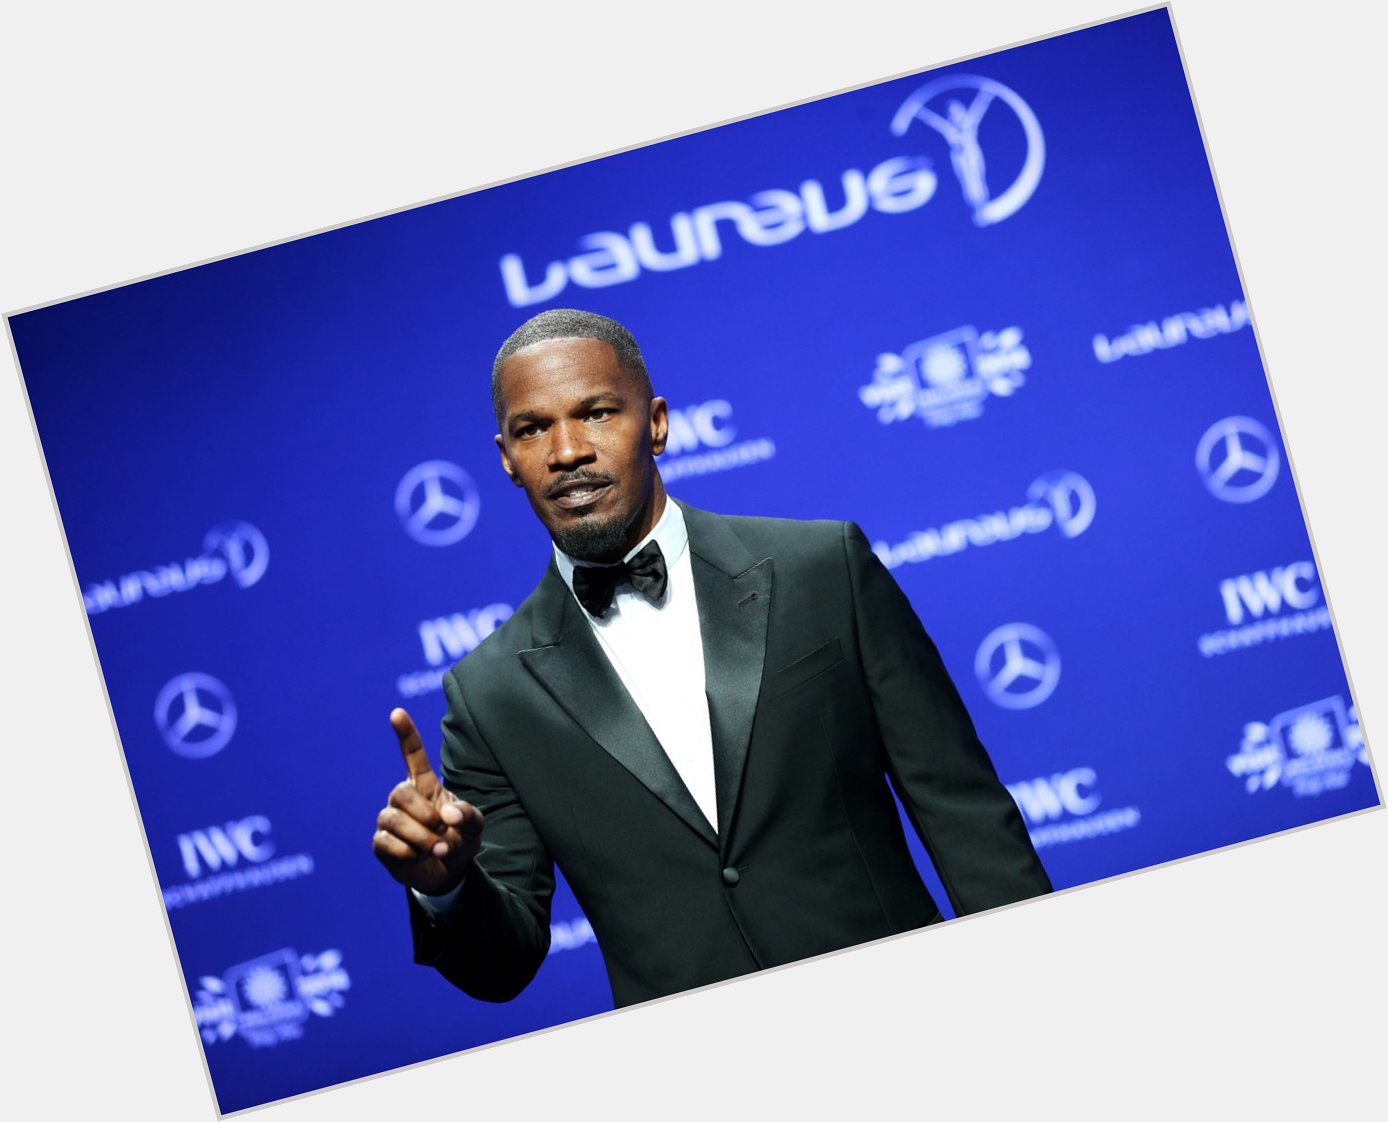 He made us laugh, dance and clap at the 2014 Laureus World Sports Awards. Happy birthday Jamie Foxx! 